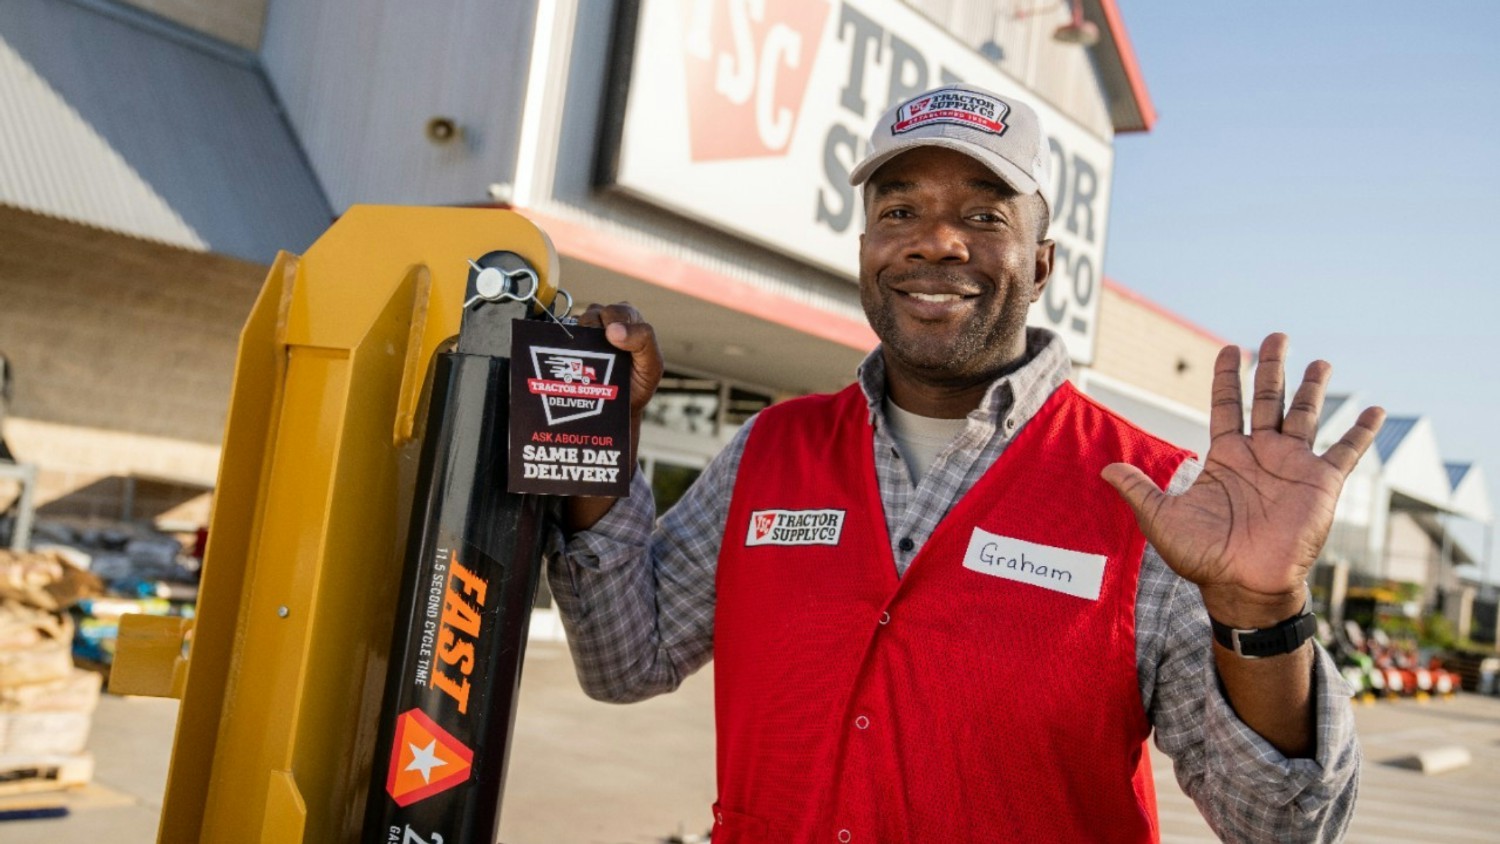 Tractor Supply Company Delivers Same-Day from 100% of Stores